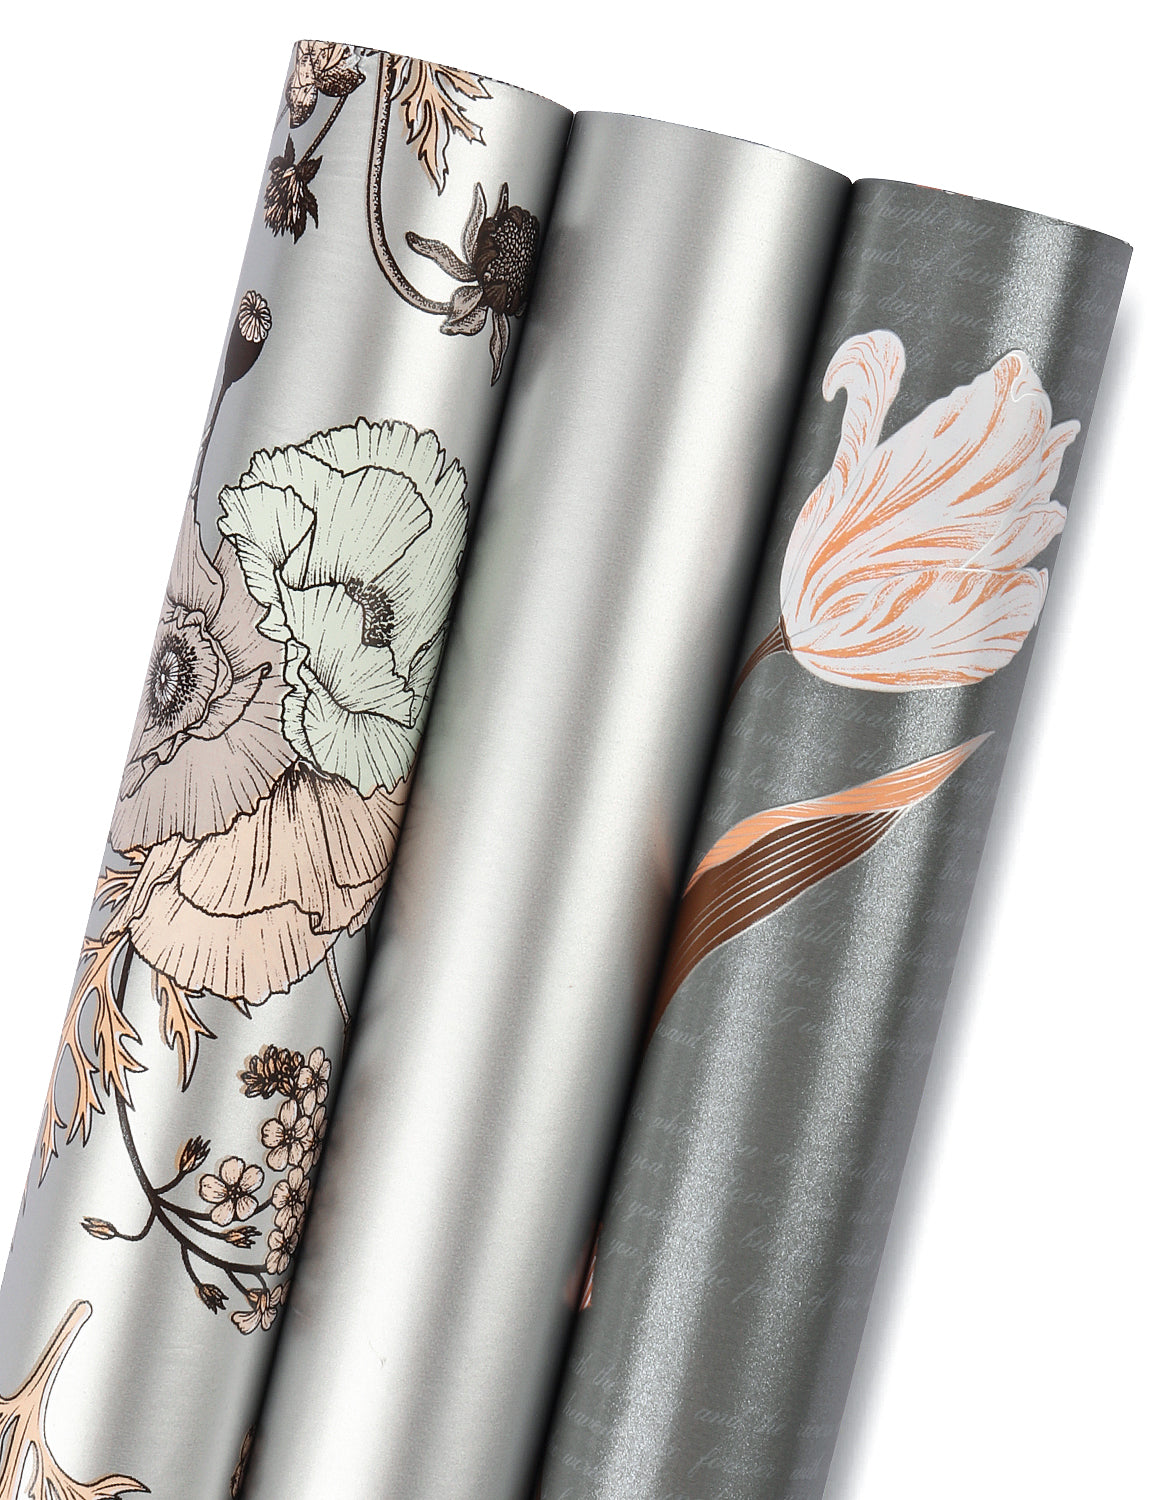 Pebble Gift Wrapping Paper in Silver with White Foil - 76.2 cm x 182.9 cm  Roll